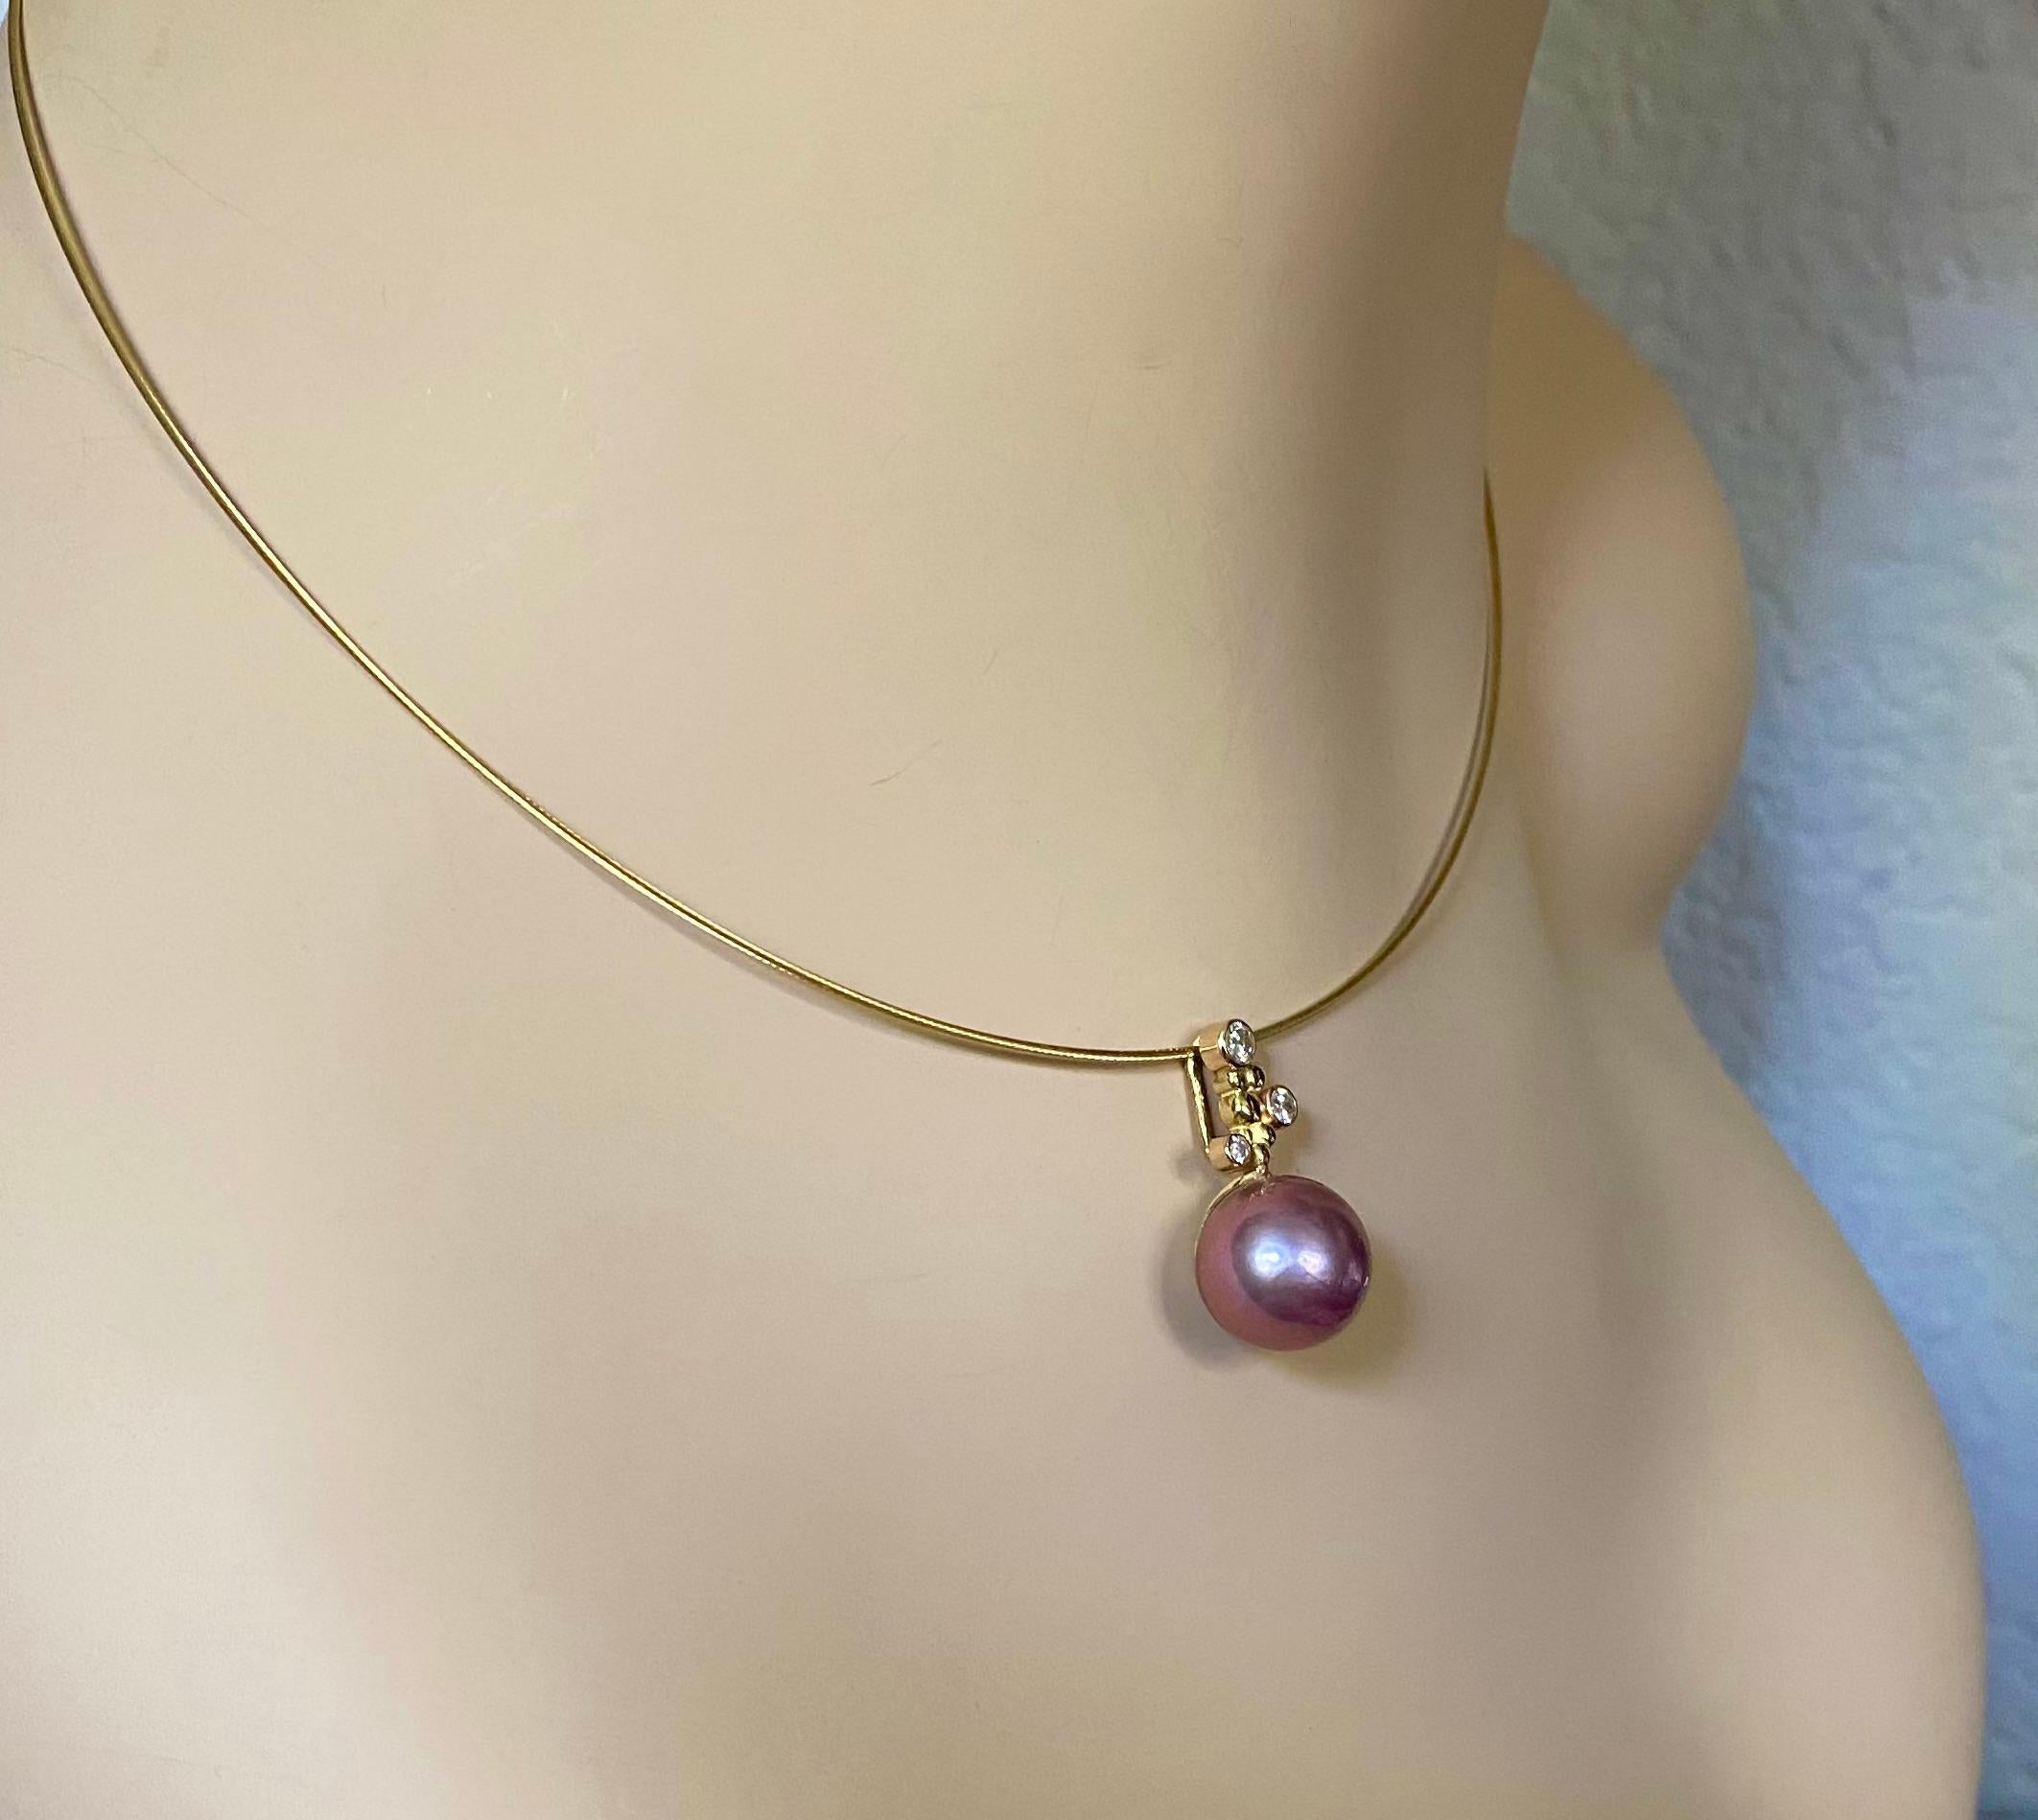 A deep lavender colored Tahitian pearl is featured in this 